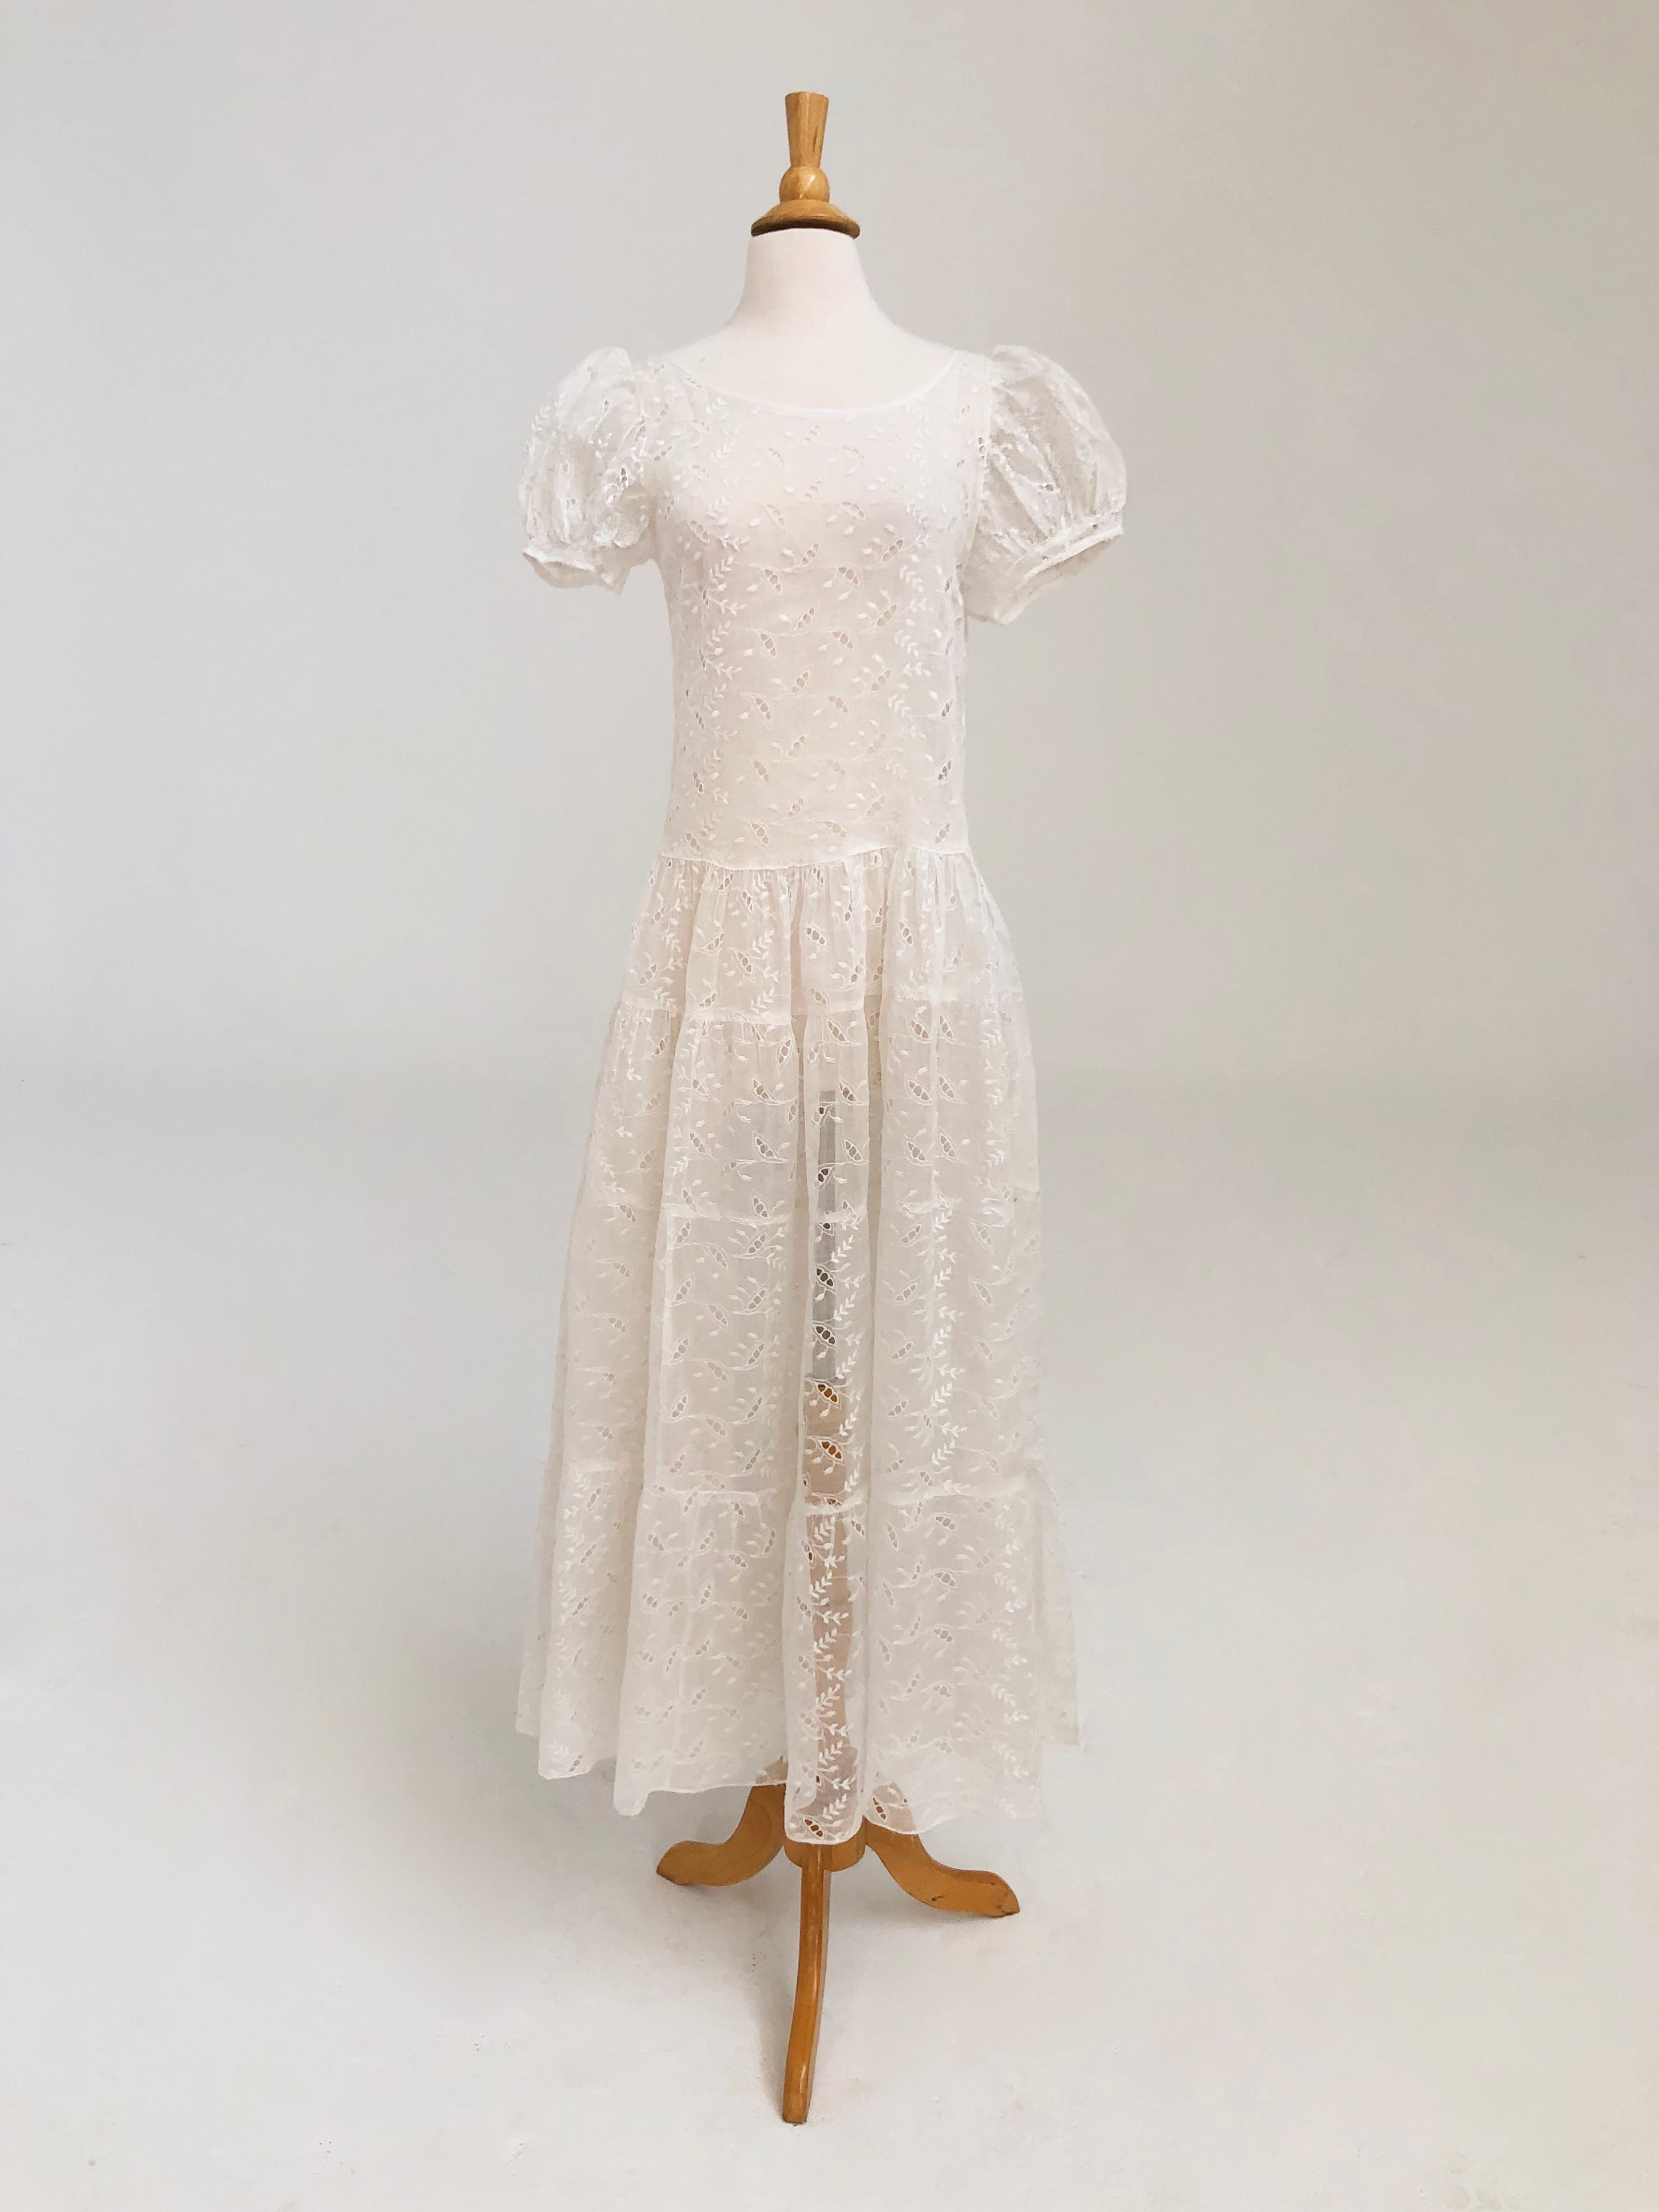 1930’s Lily of The Valley Motif Eyelet Dress